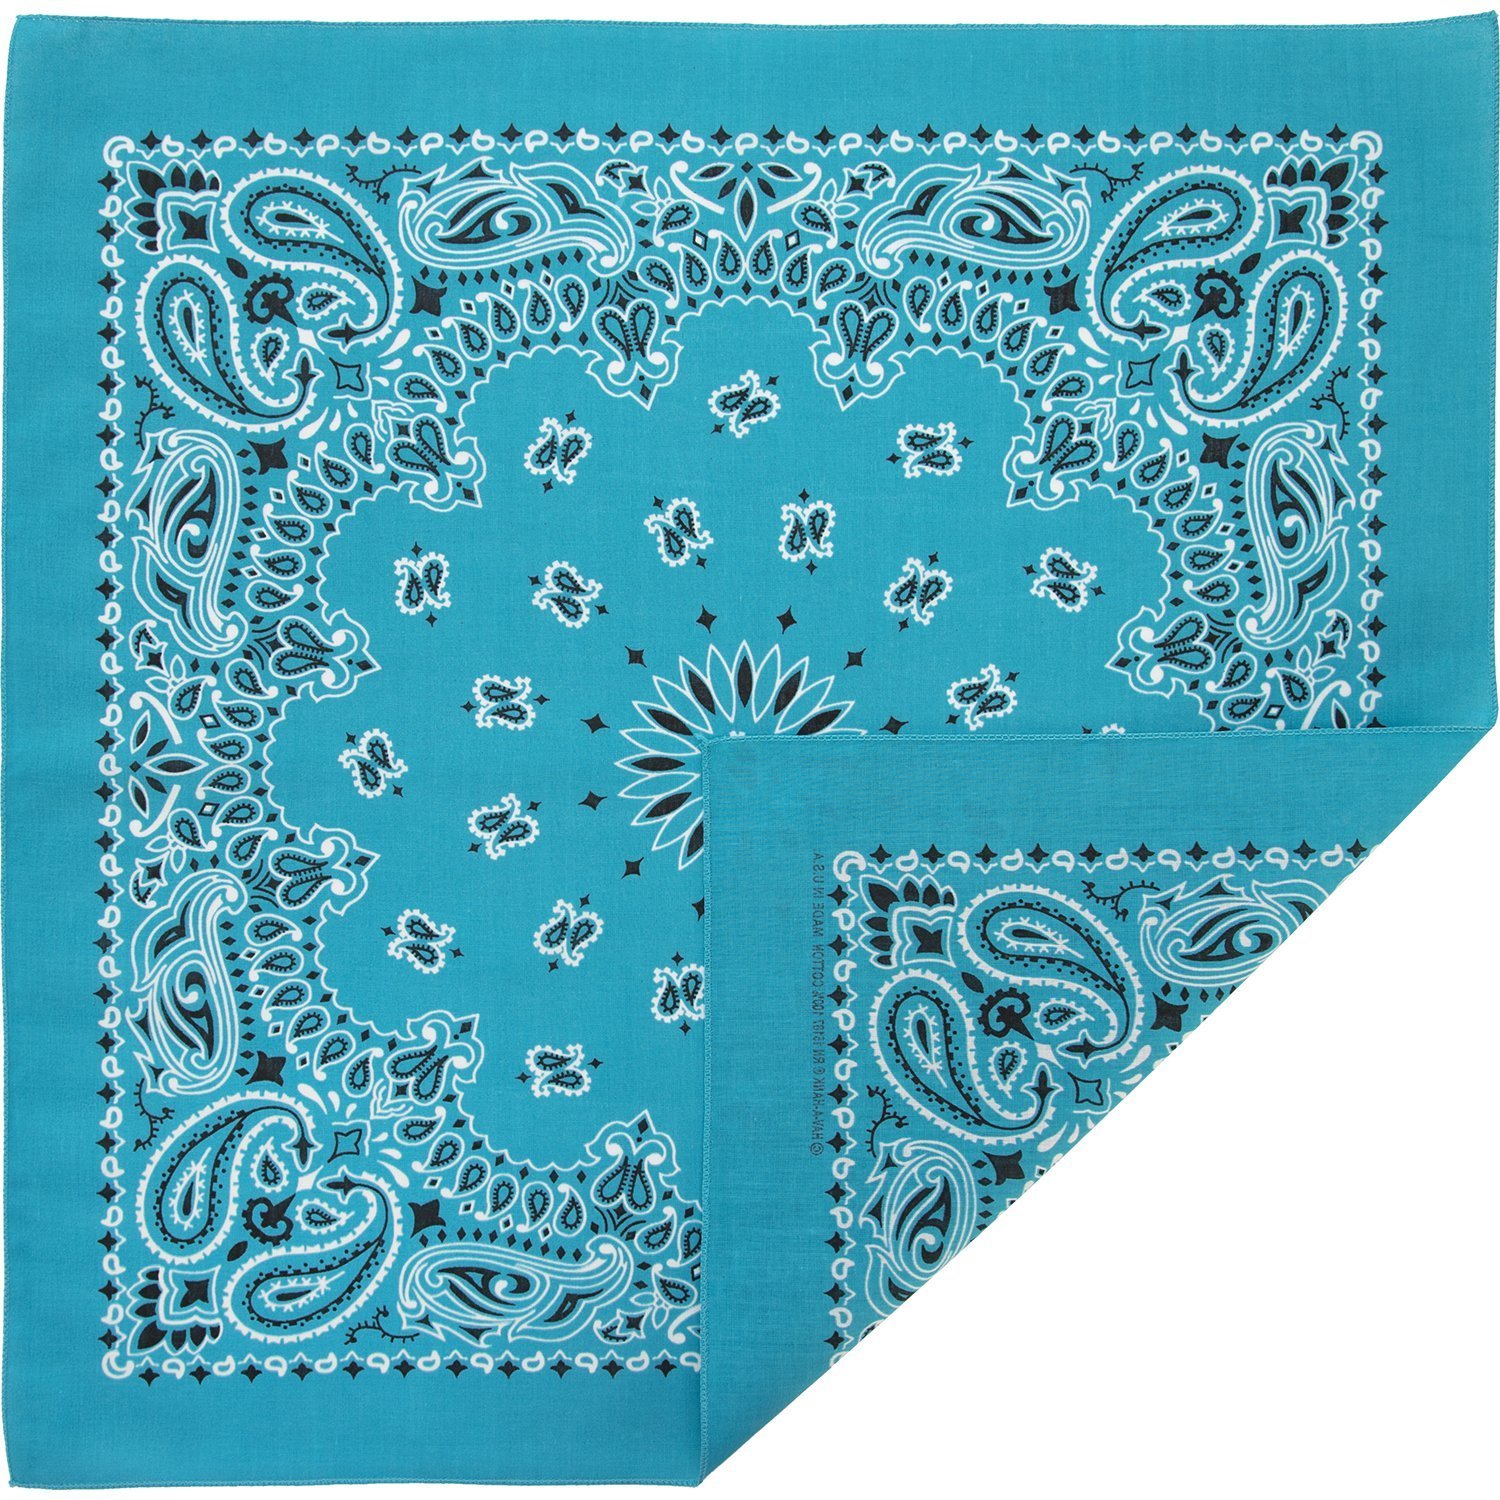 American Made Turquoise Western Paisley bandanas - Single Piece - 100% Cotton - 22x22 Inches